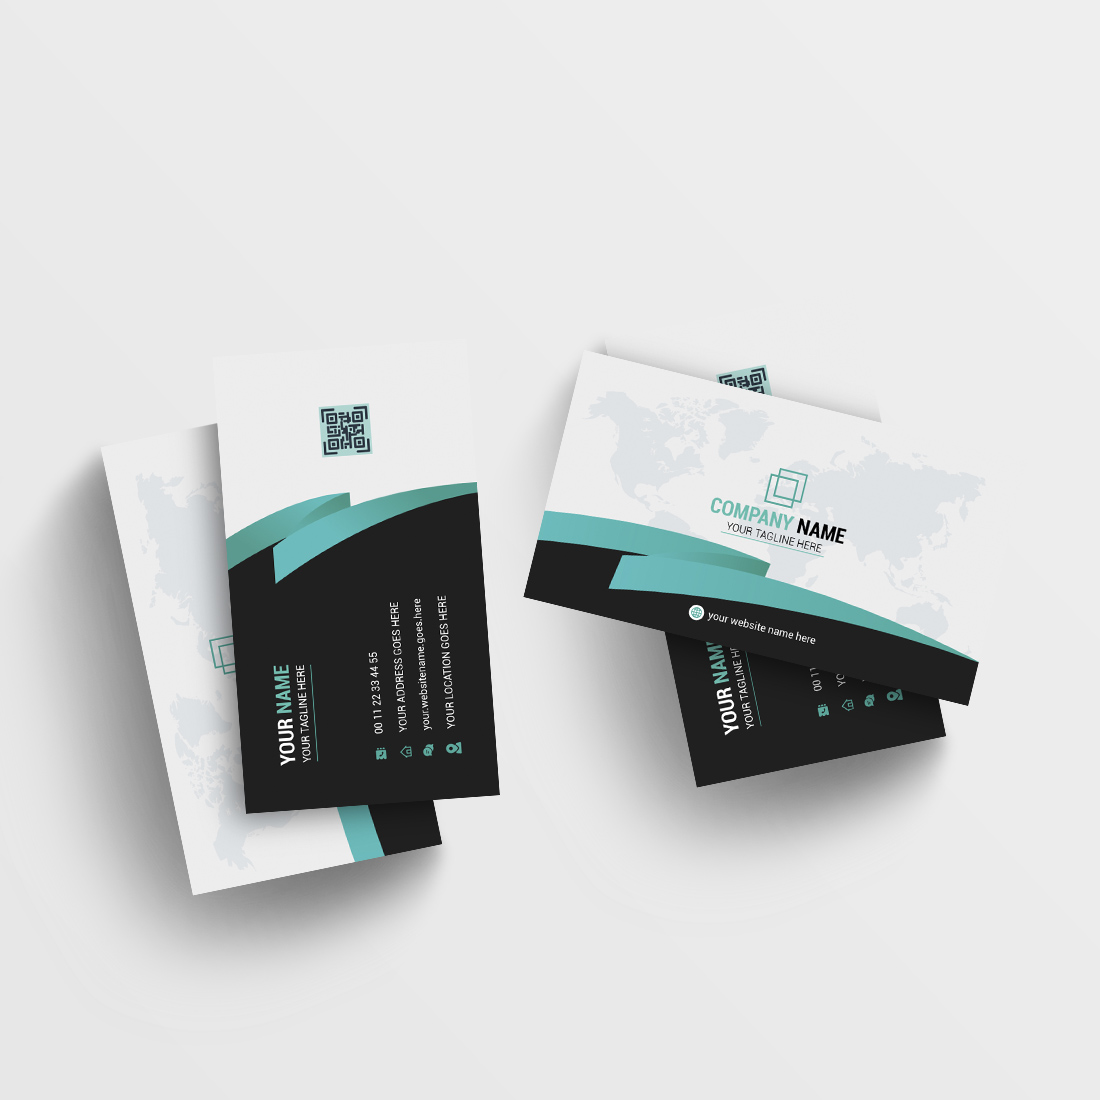 Set of three business cards on top of each other.